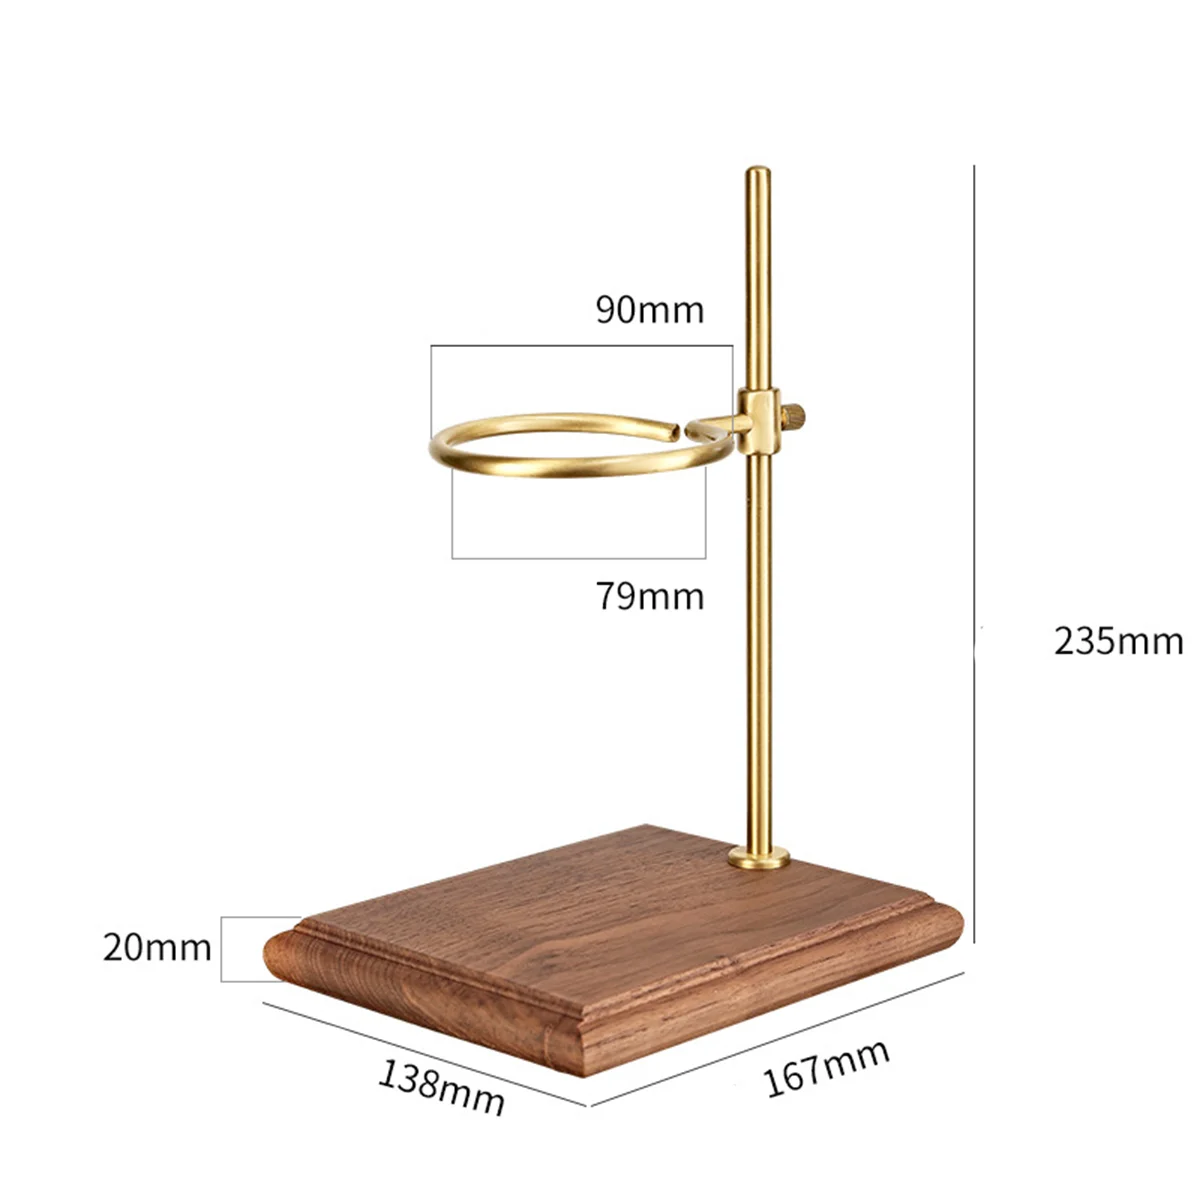 

Pour over Coffee Maker Stand with Wood Base Adjustable Height Rack Dripper Filter Holder for Manual Brewing Walnut Wood